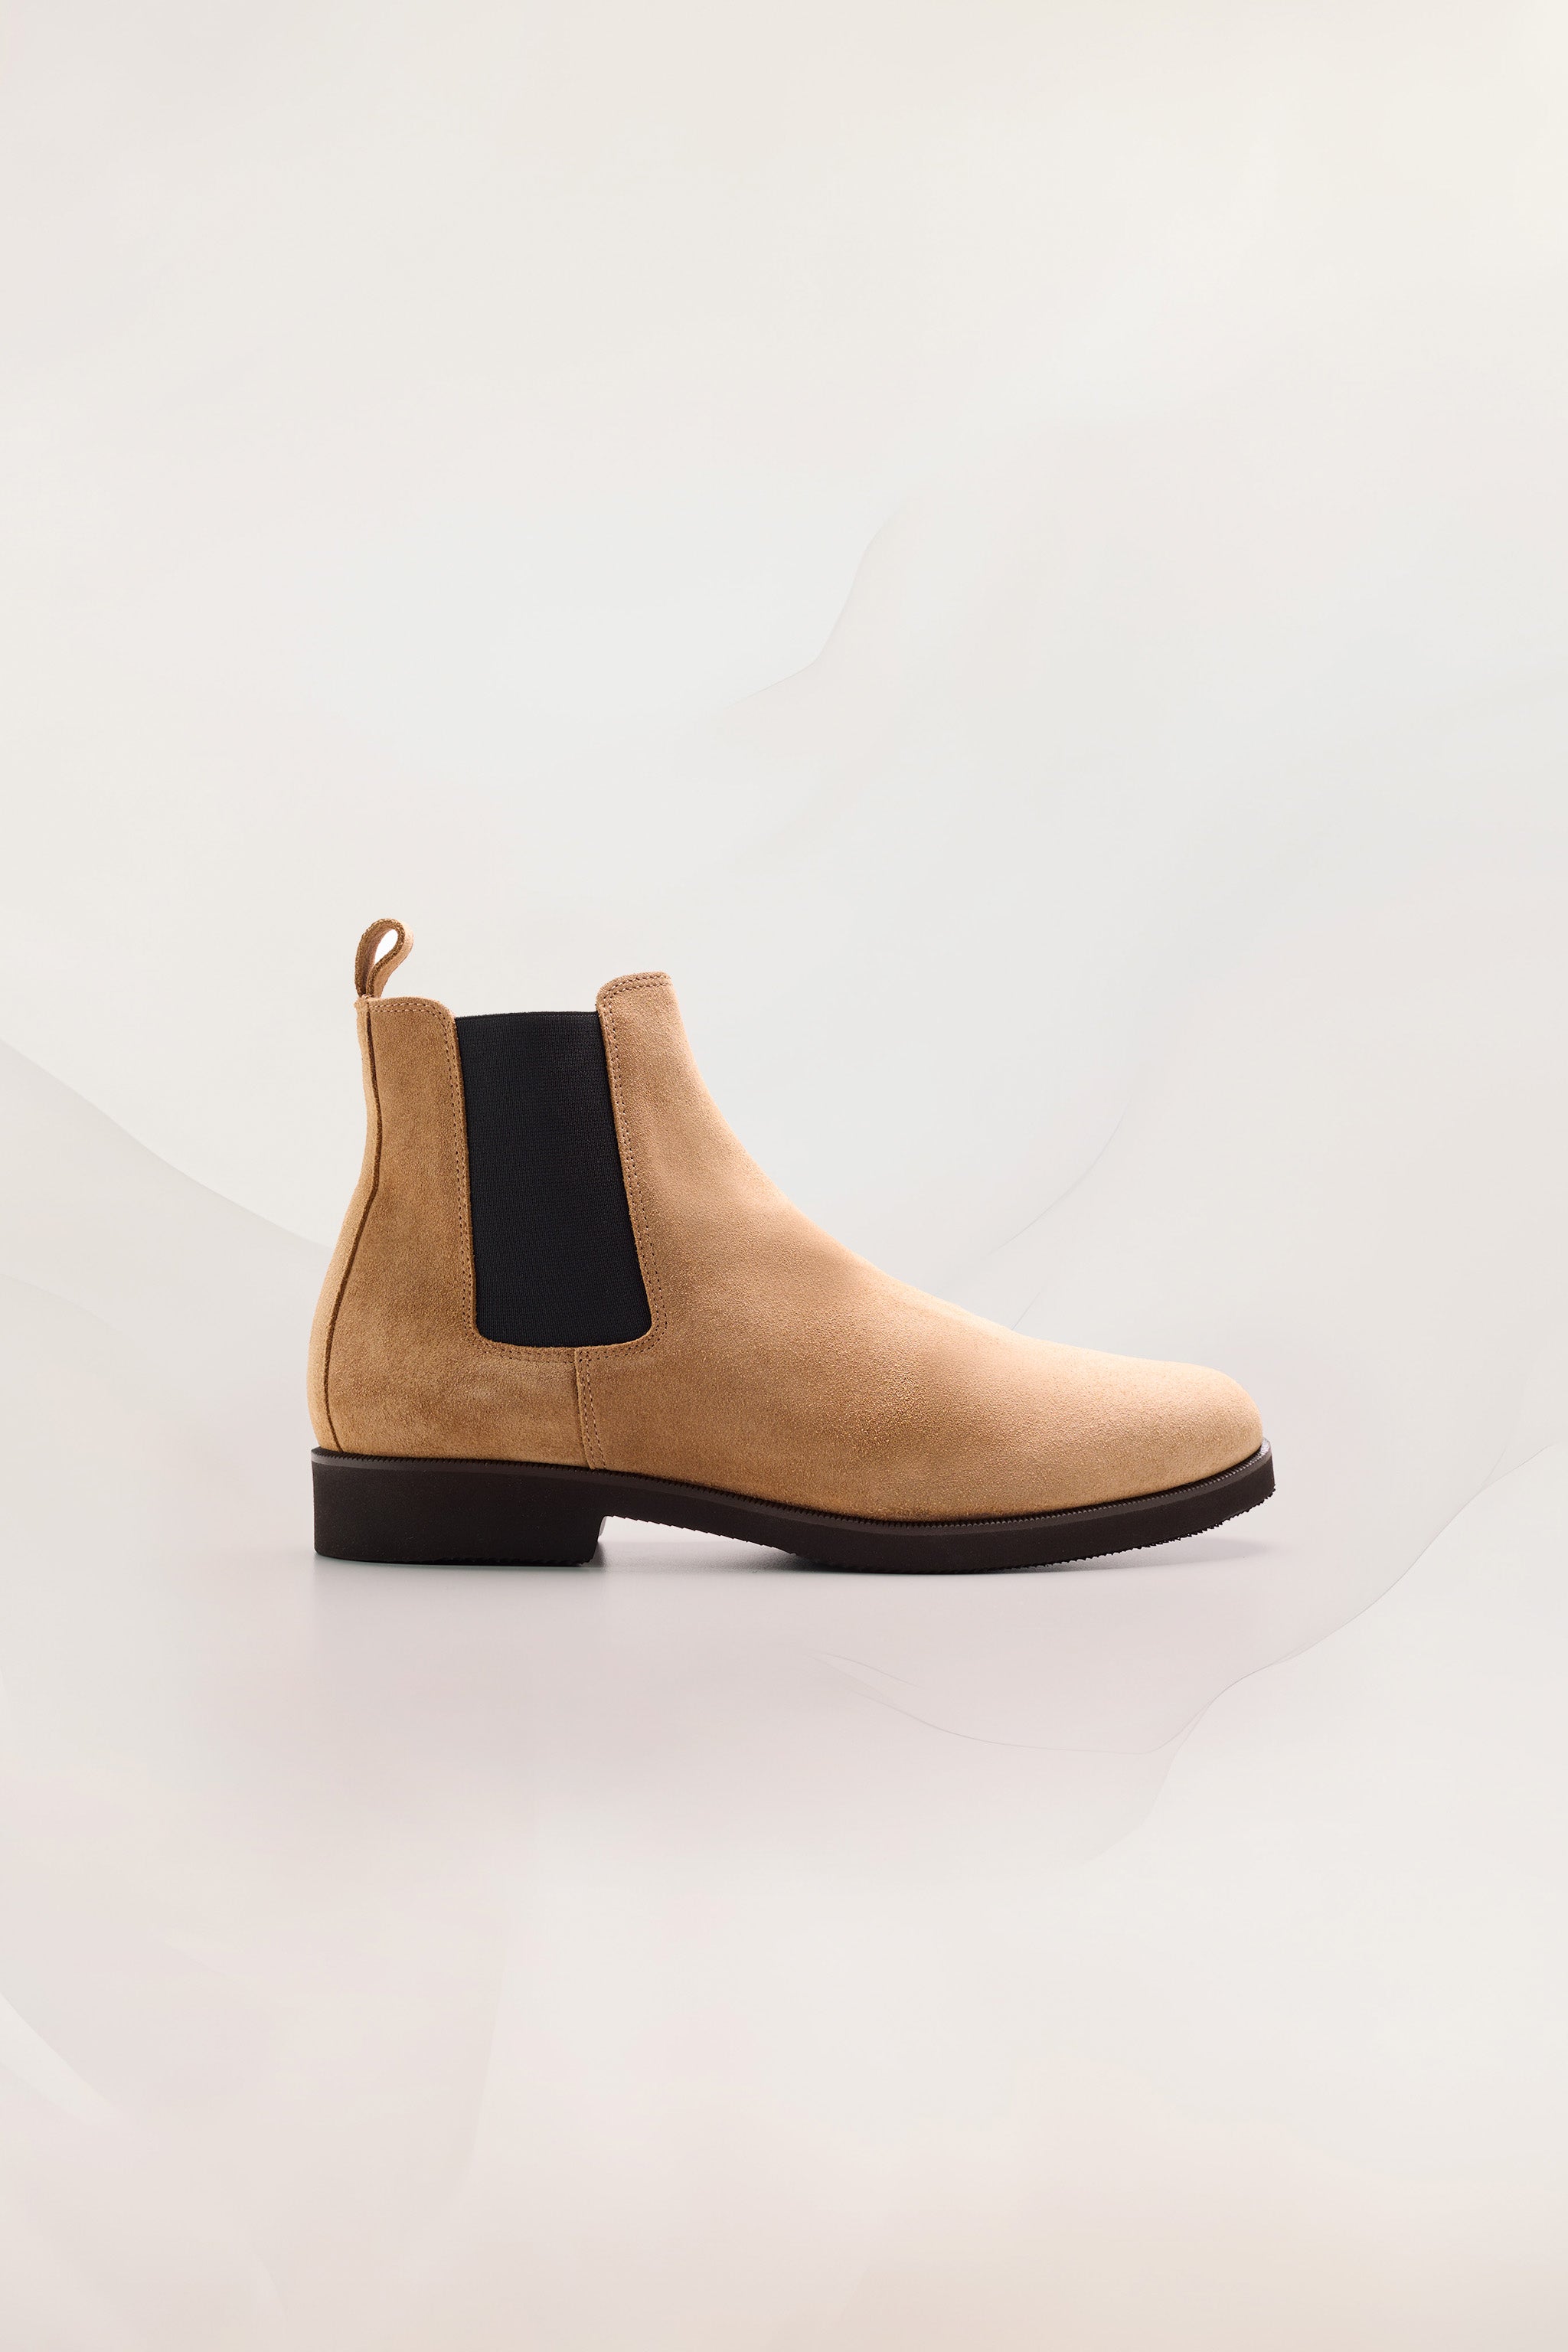 Womens Chelsea Boots in Noce Suede